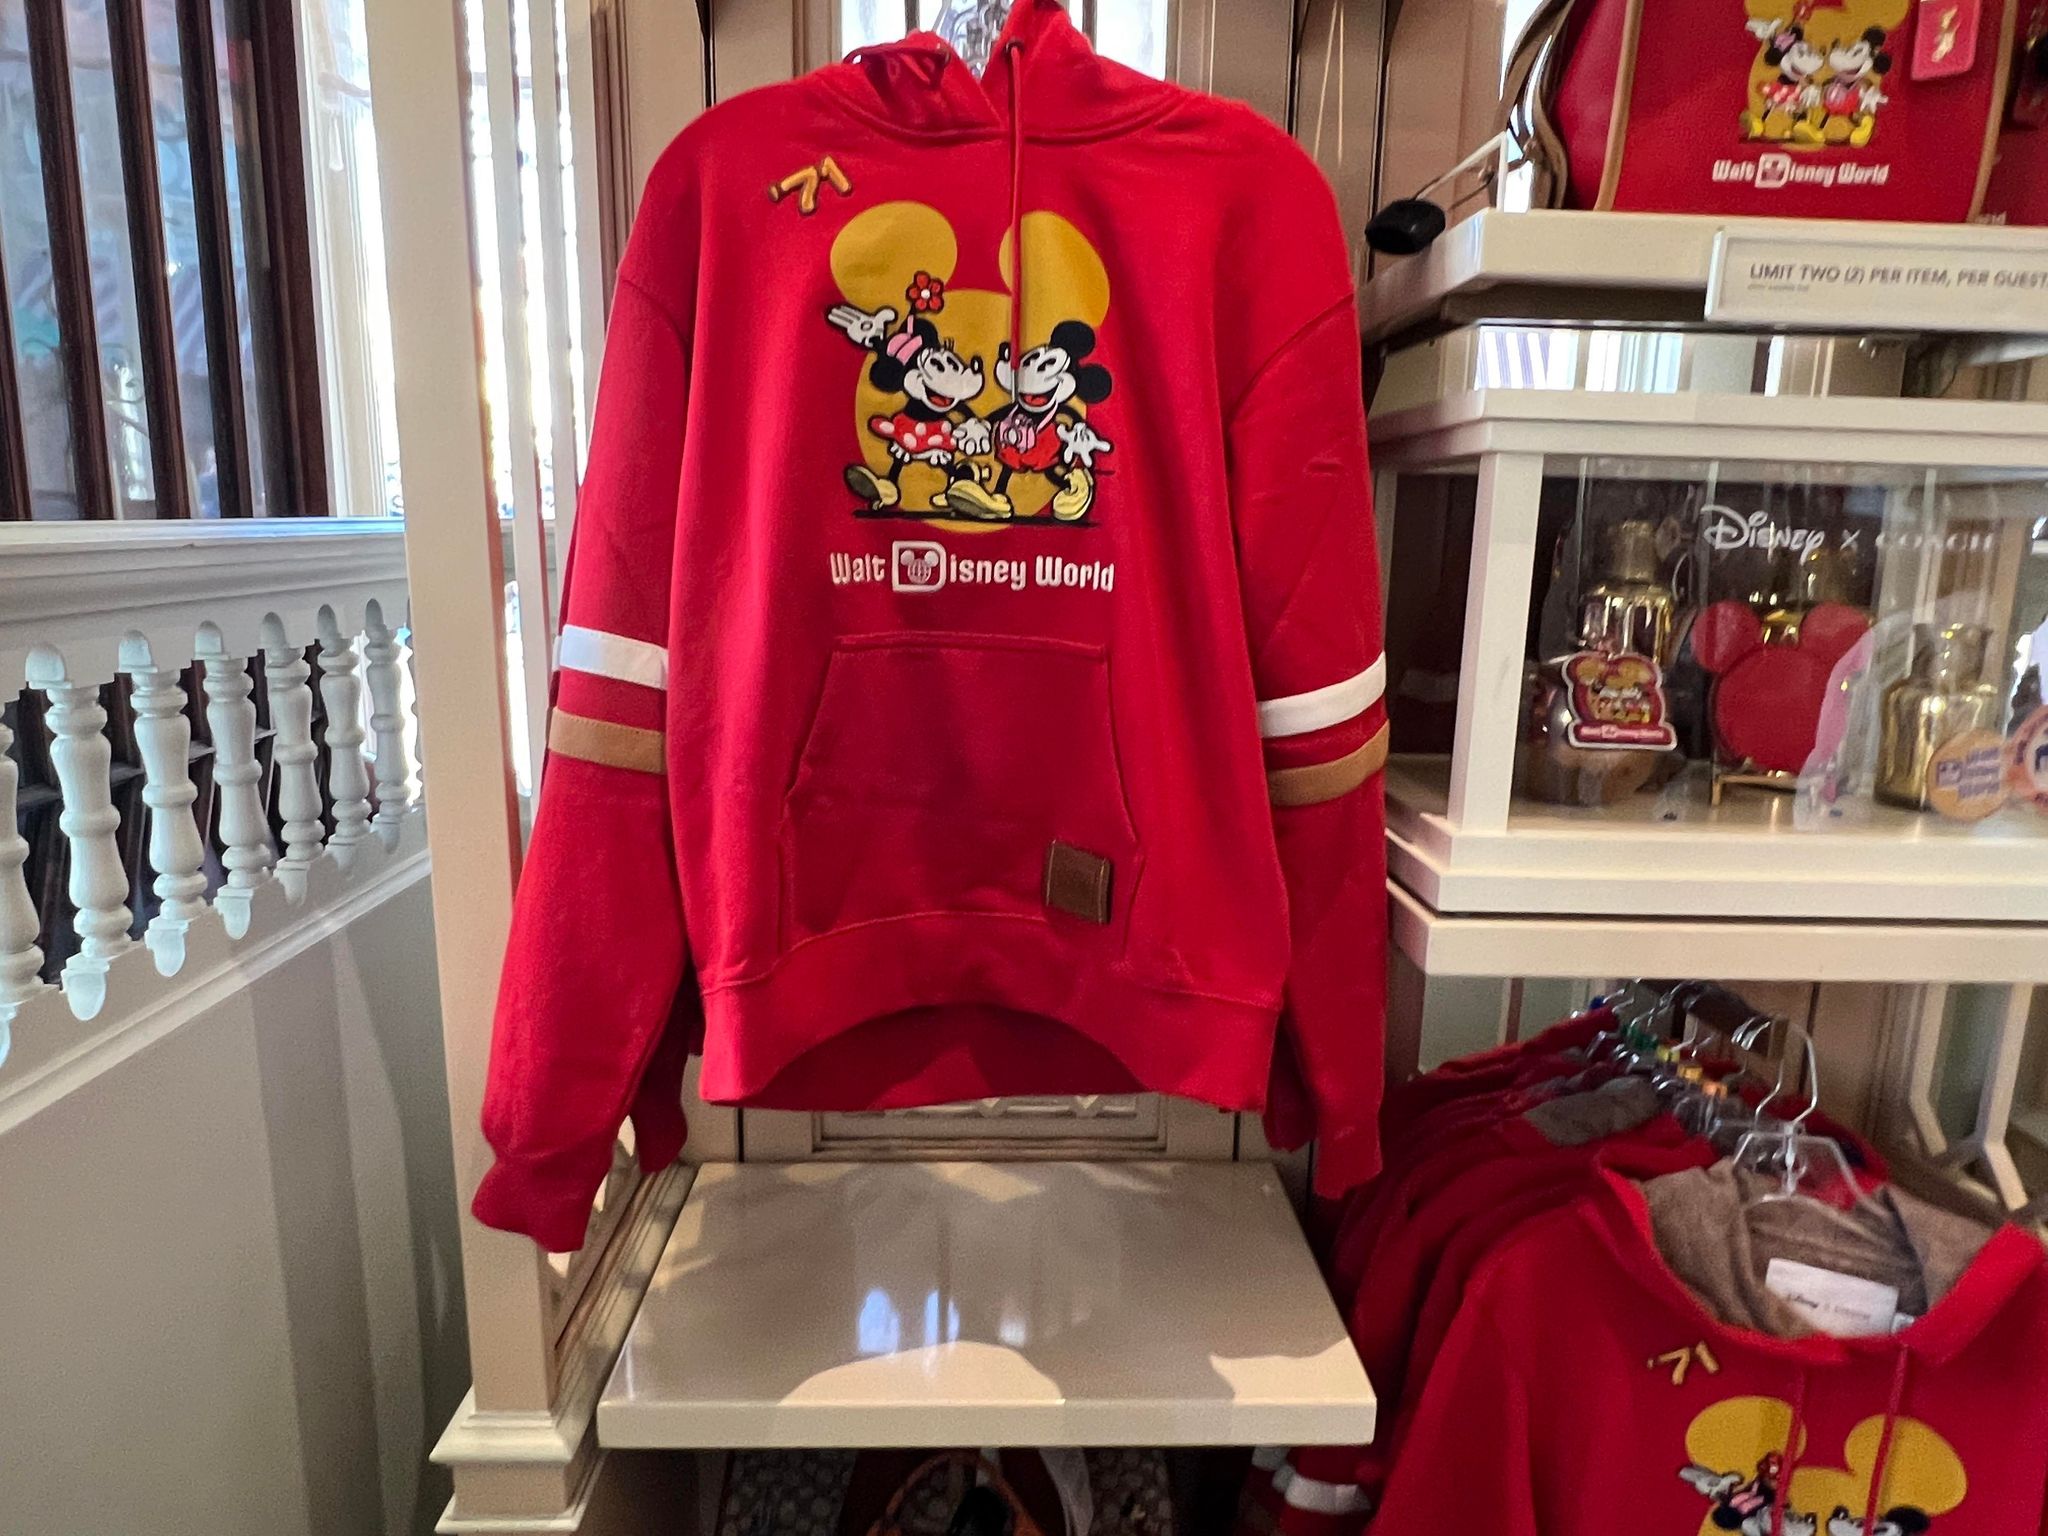 Disney World Coach Collection Includes Awesome Apparel 